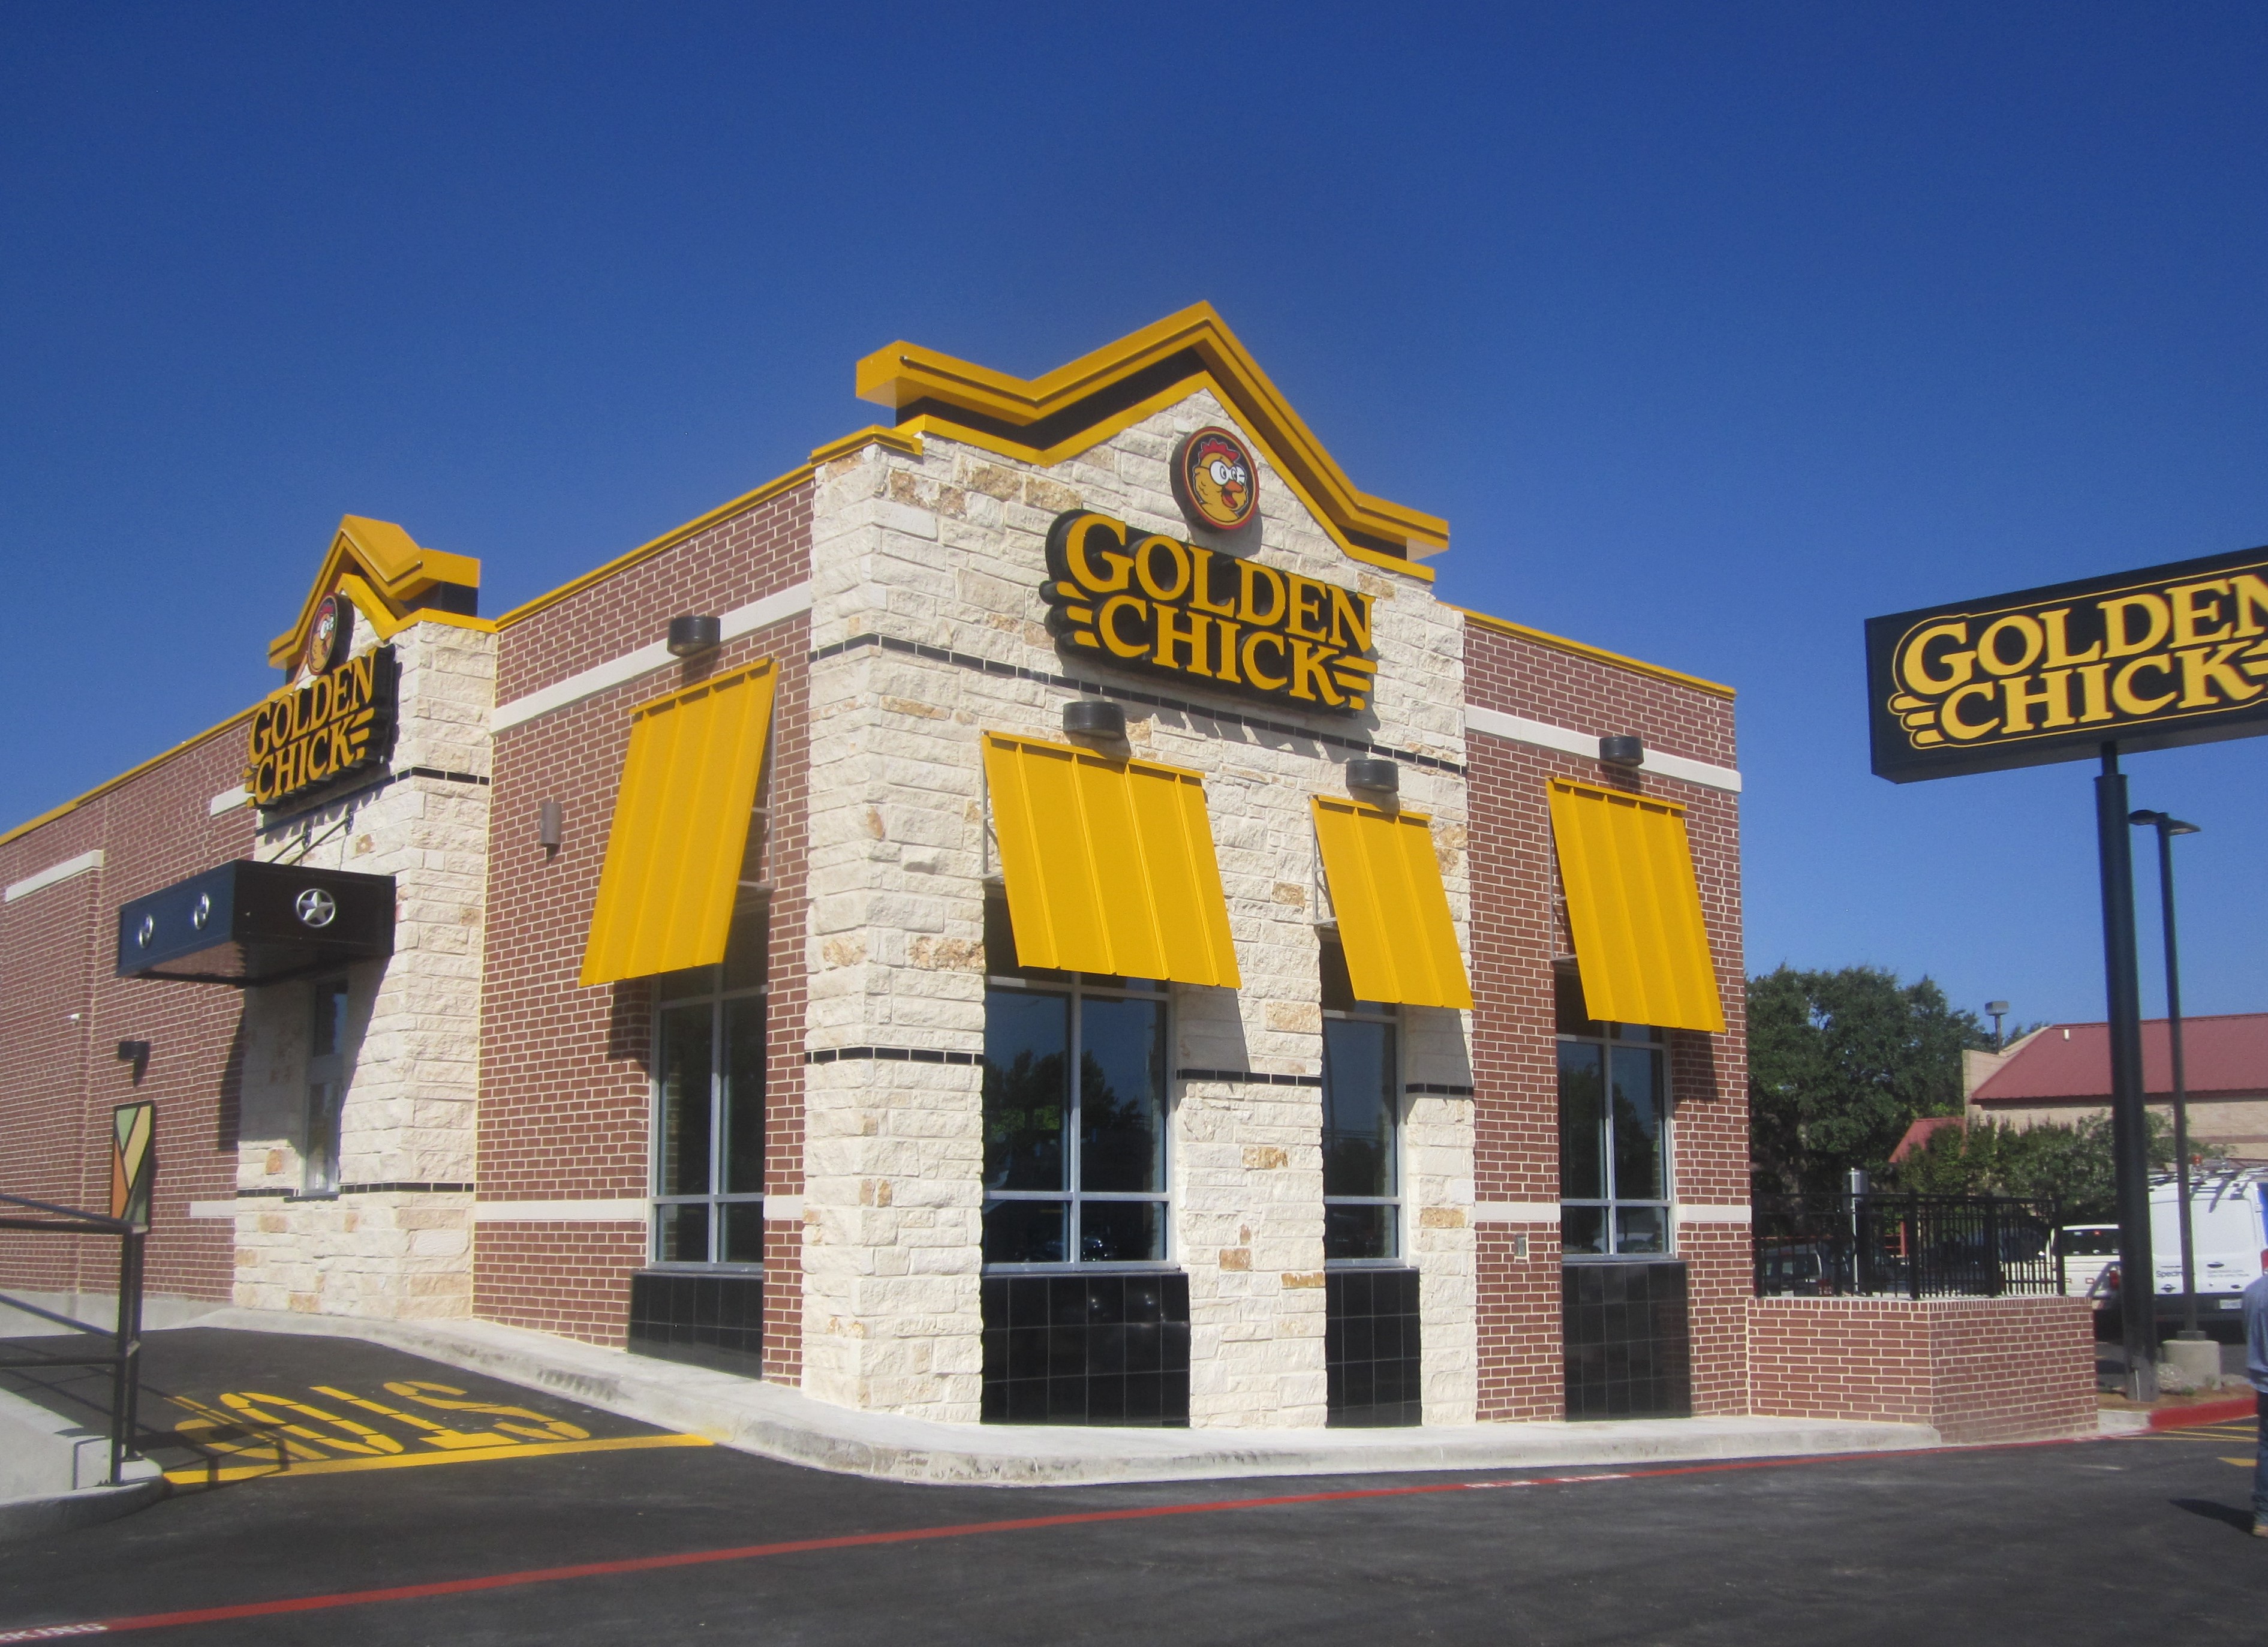 Golden Chick storefront.  Your local Golden Chick fast food restaurant in Kerrville, Texas